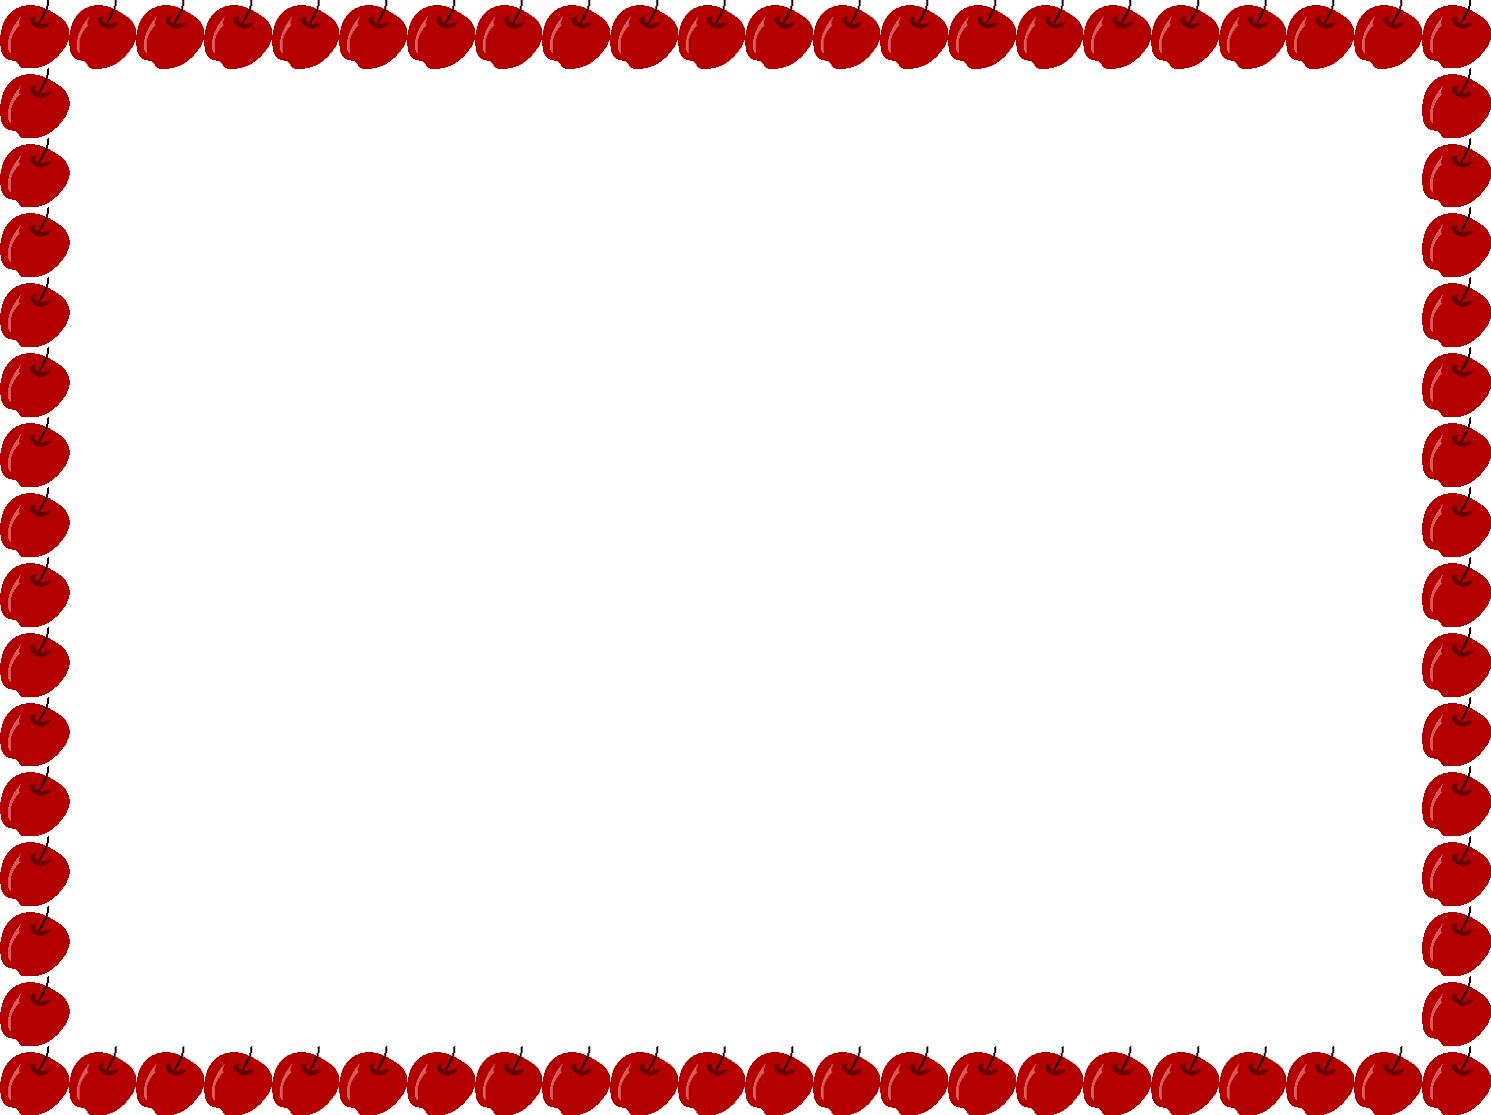 Red And Black Border Clip Art - ClipArt Best